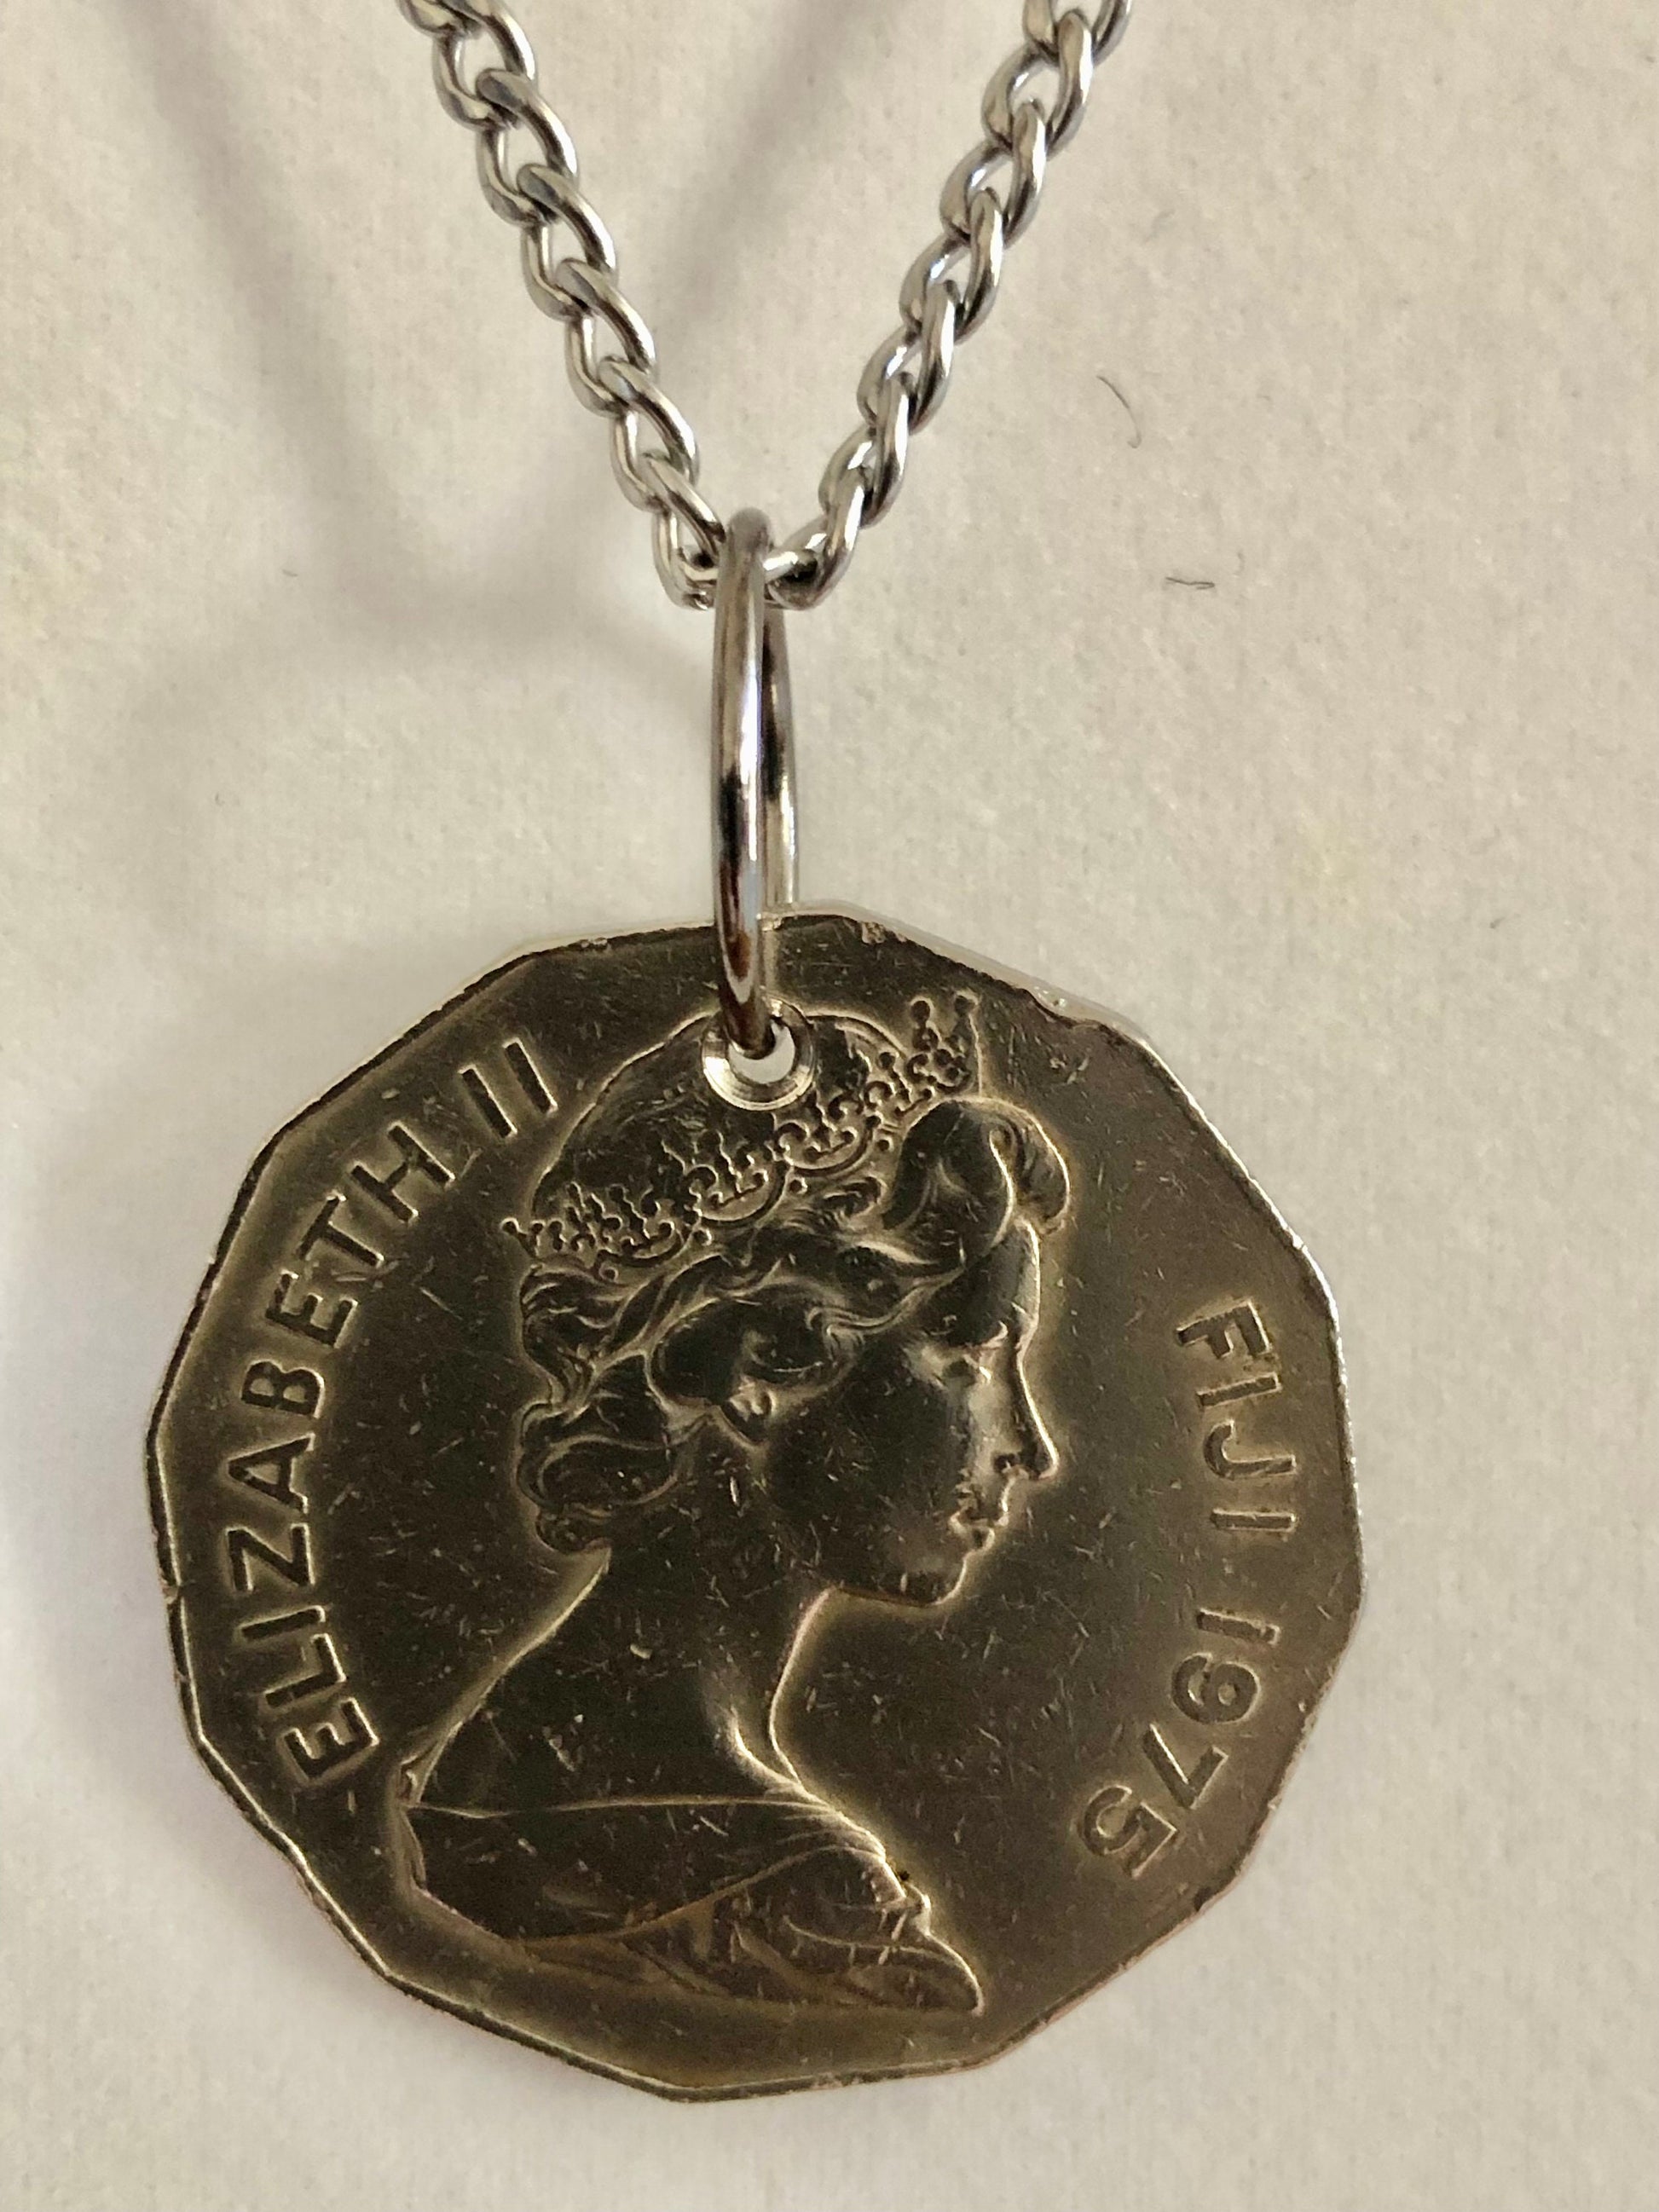 Fiji Necklace Coin Chain 50 Cent Piece Fijian Personal Vintage Handmade Jewelry Gift Friend Charm For Him Her World Coin Collector